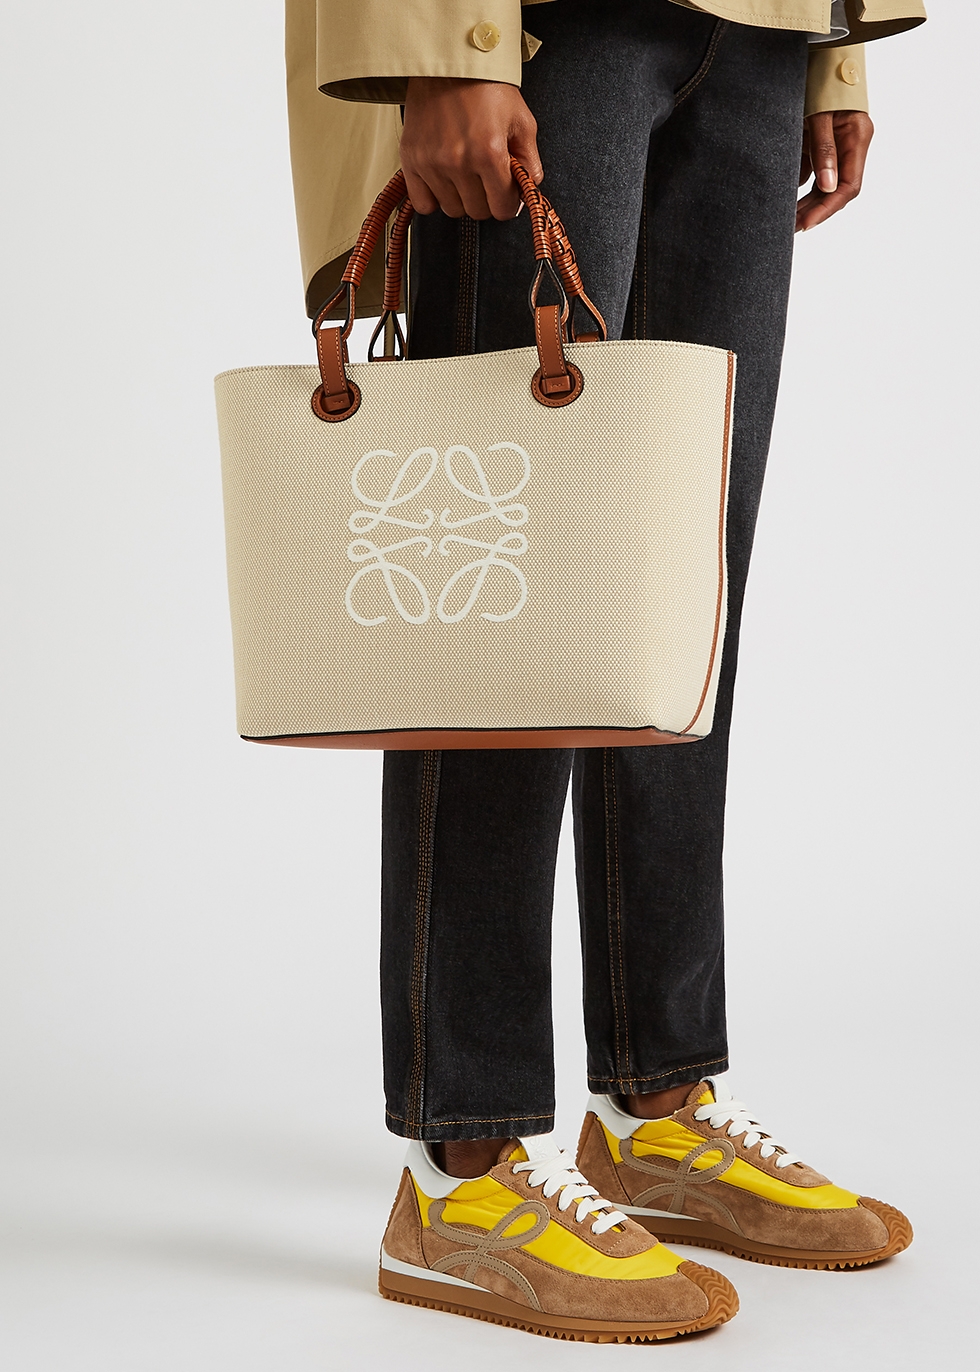 Loewe Anagram Small Canvas Tote